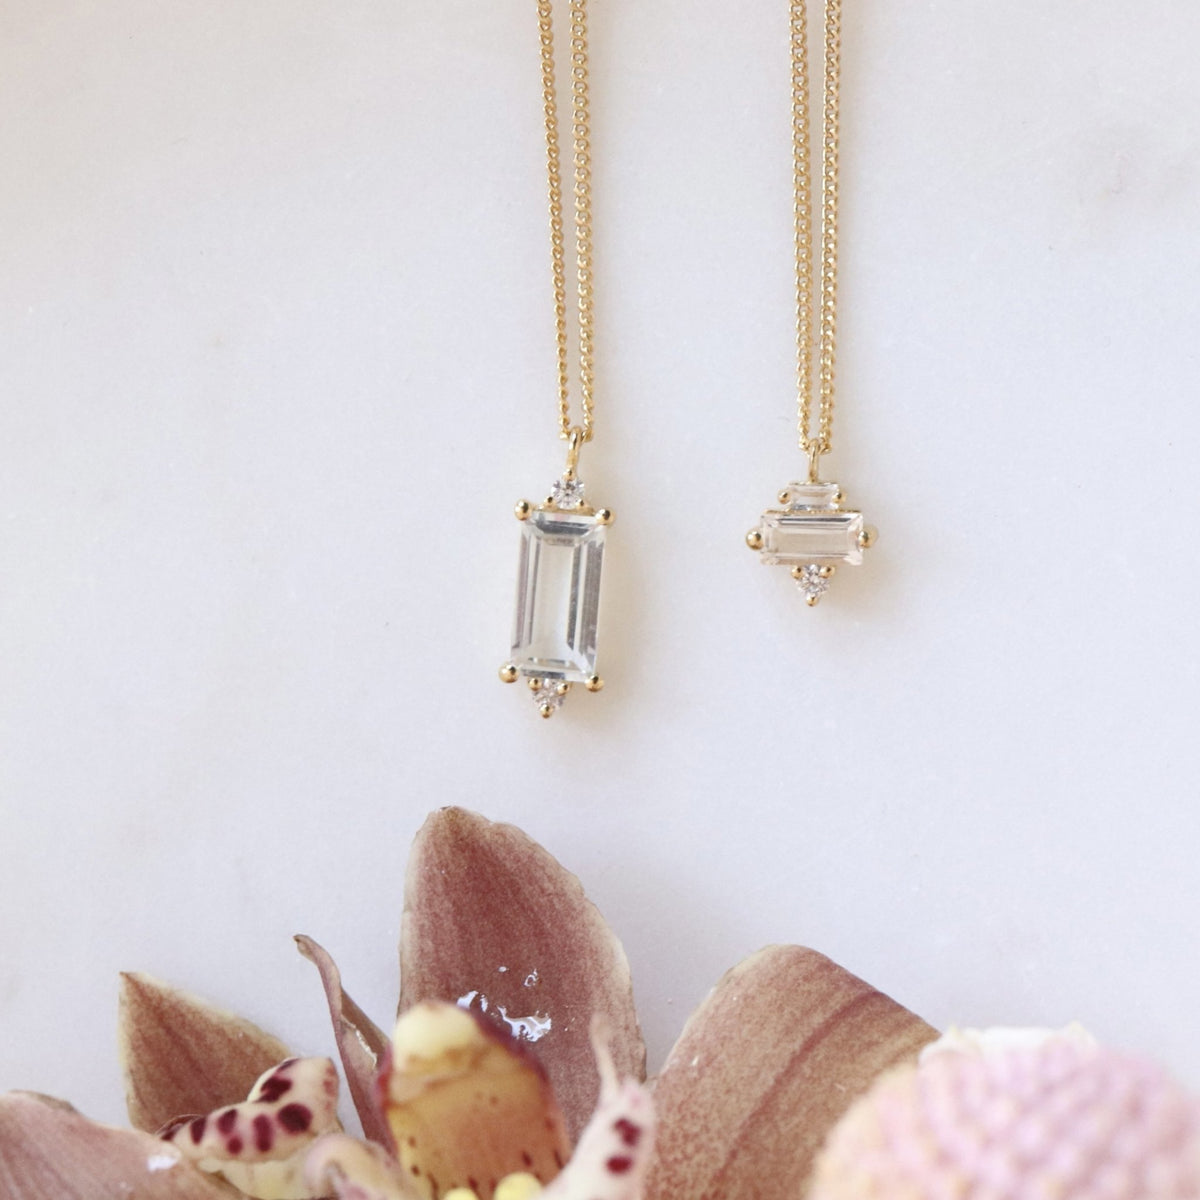 Loyal Drop Necklace - White Topaz, Cubic Zirconia &amp; Gold - SO PRETTY CARA COTTER